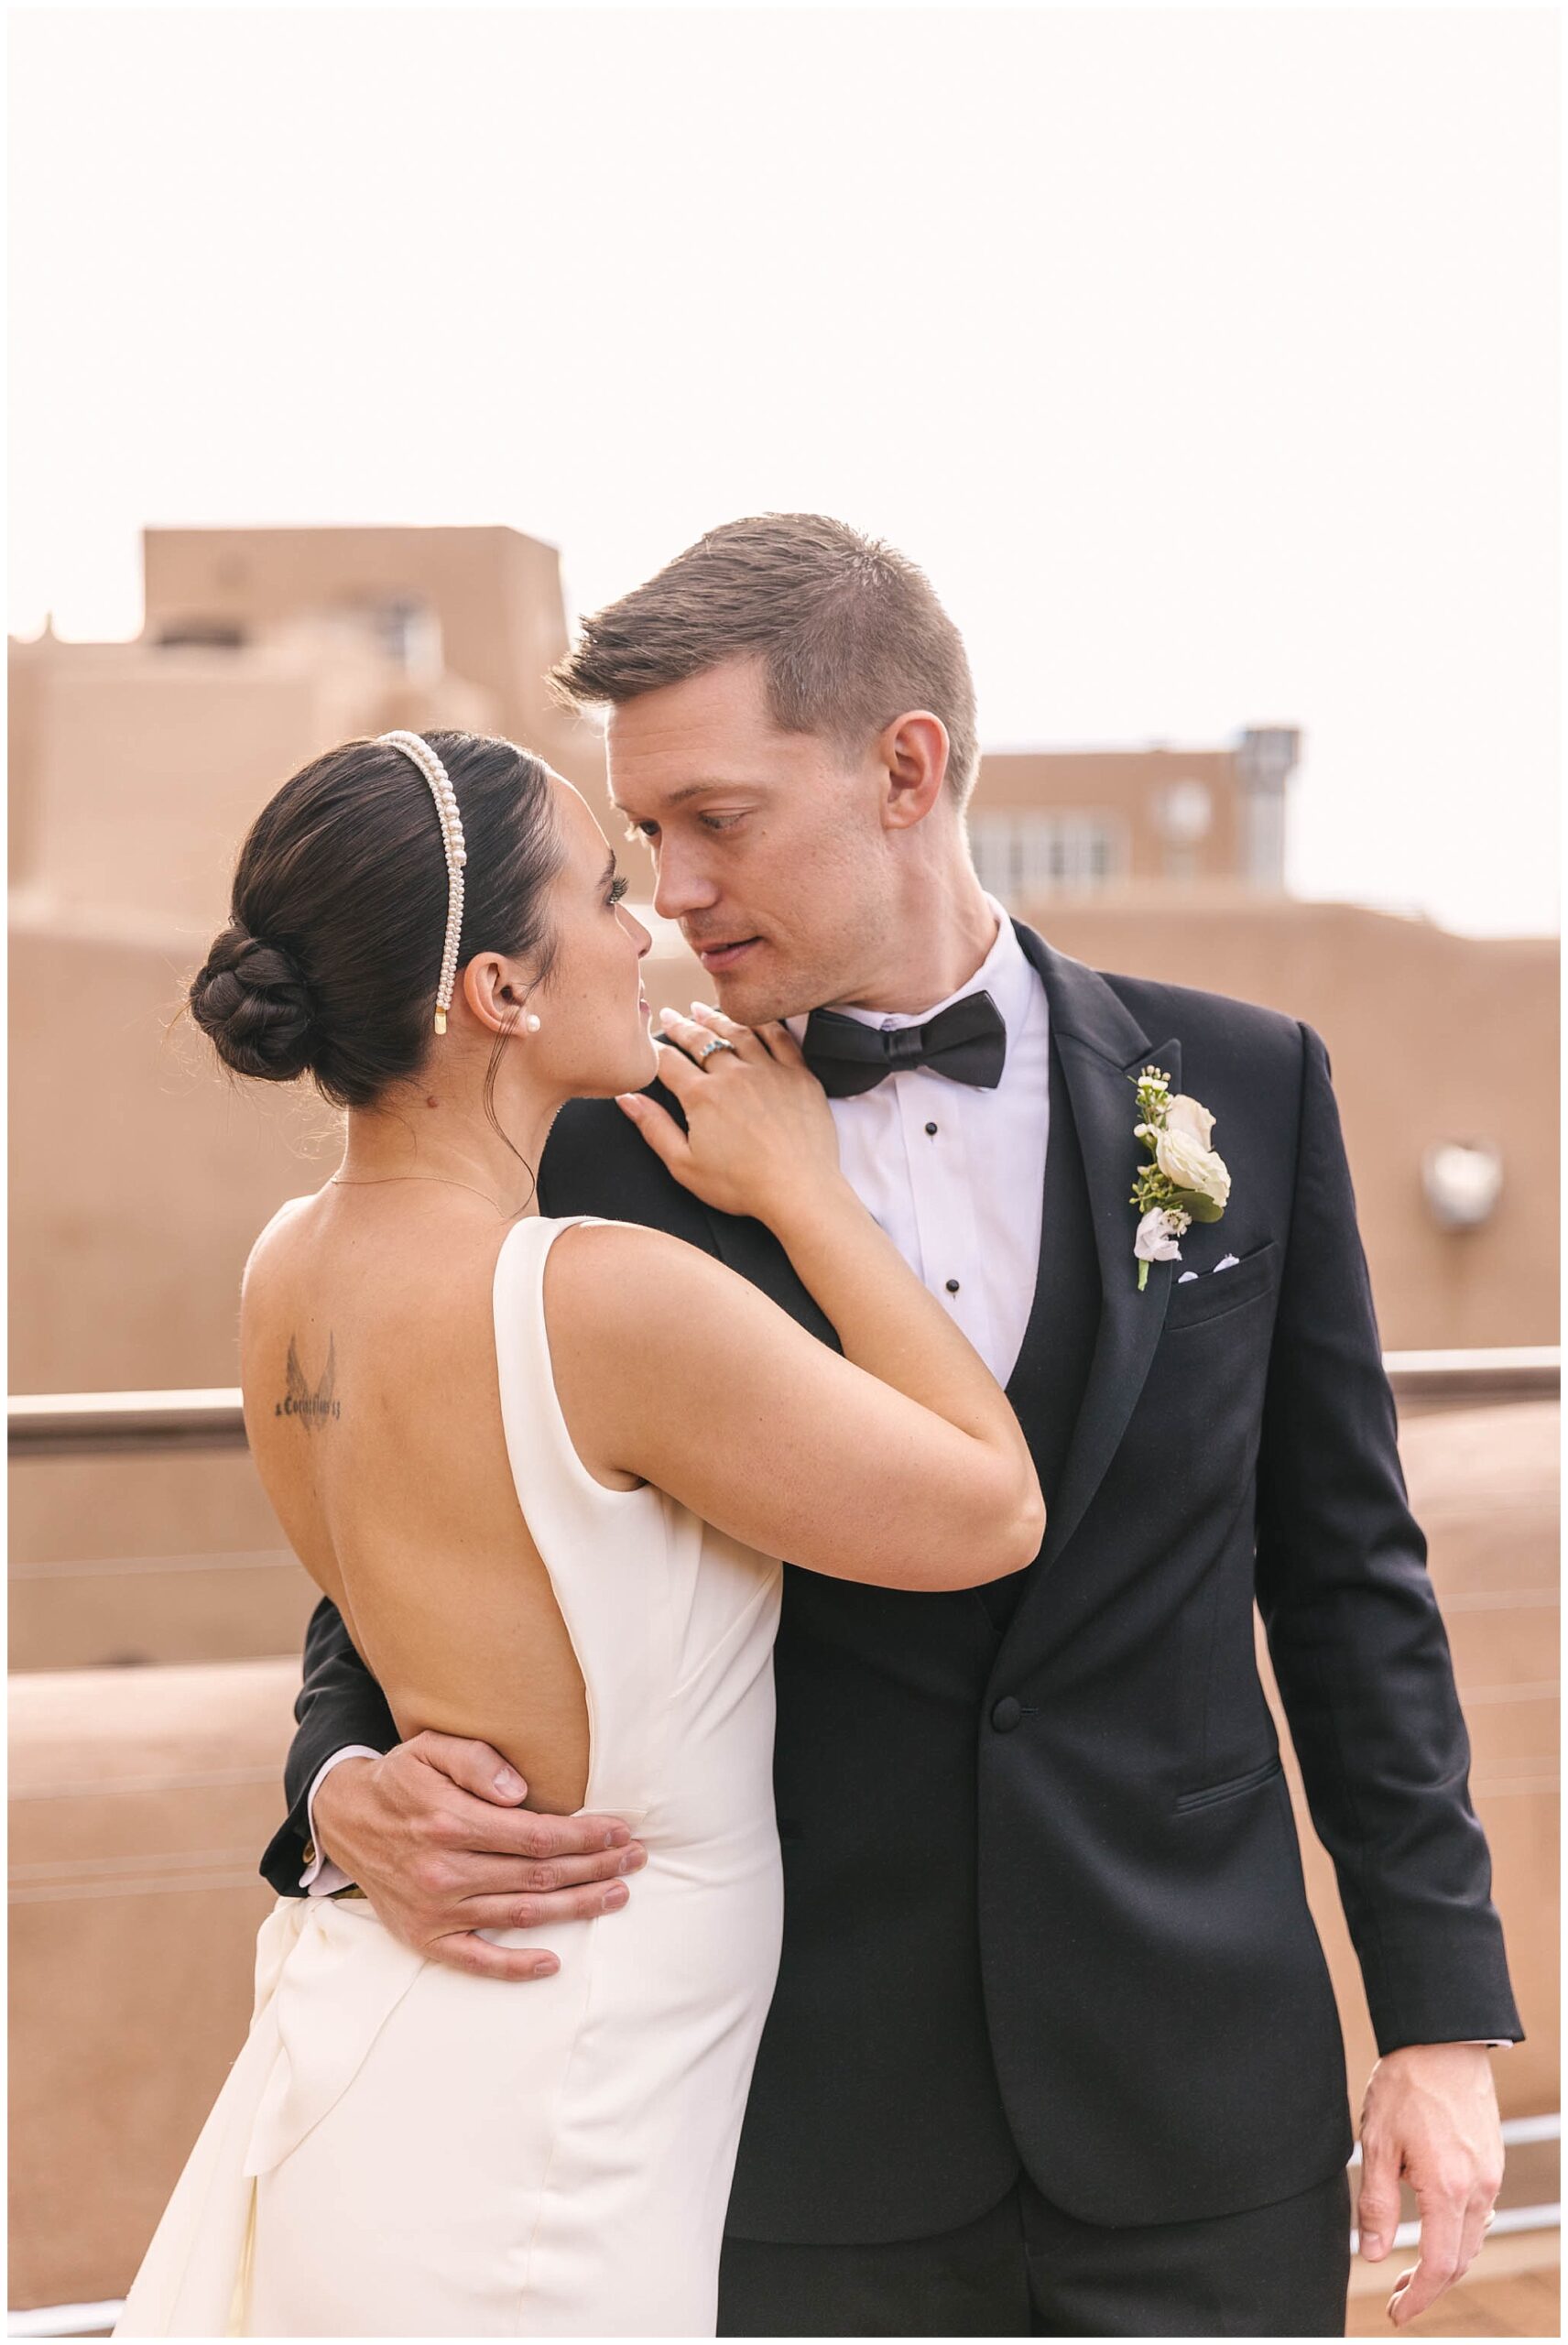 Classic and chic bride and groom portraits on adobe rooftop at La Fonda on the Plaza wedding in Santa Fe New Mexico